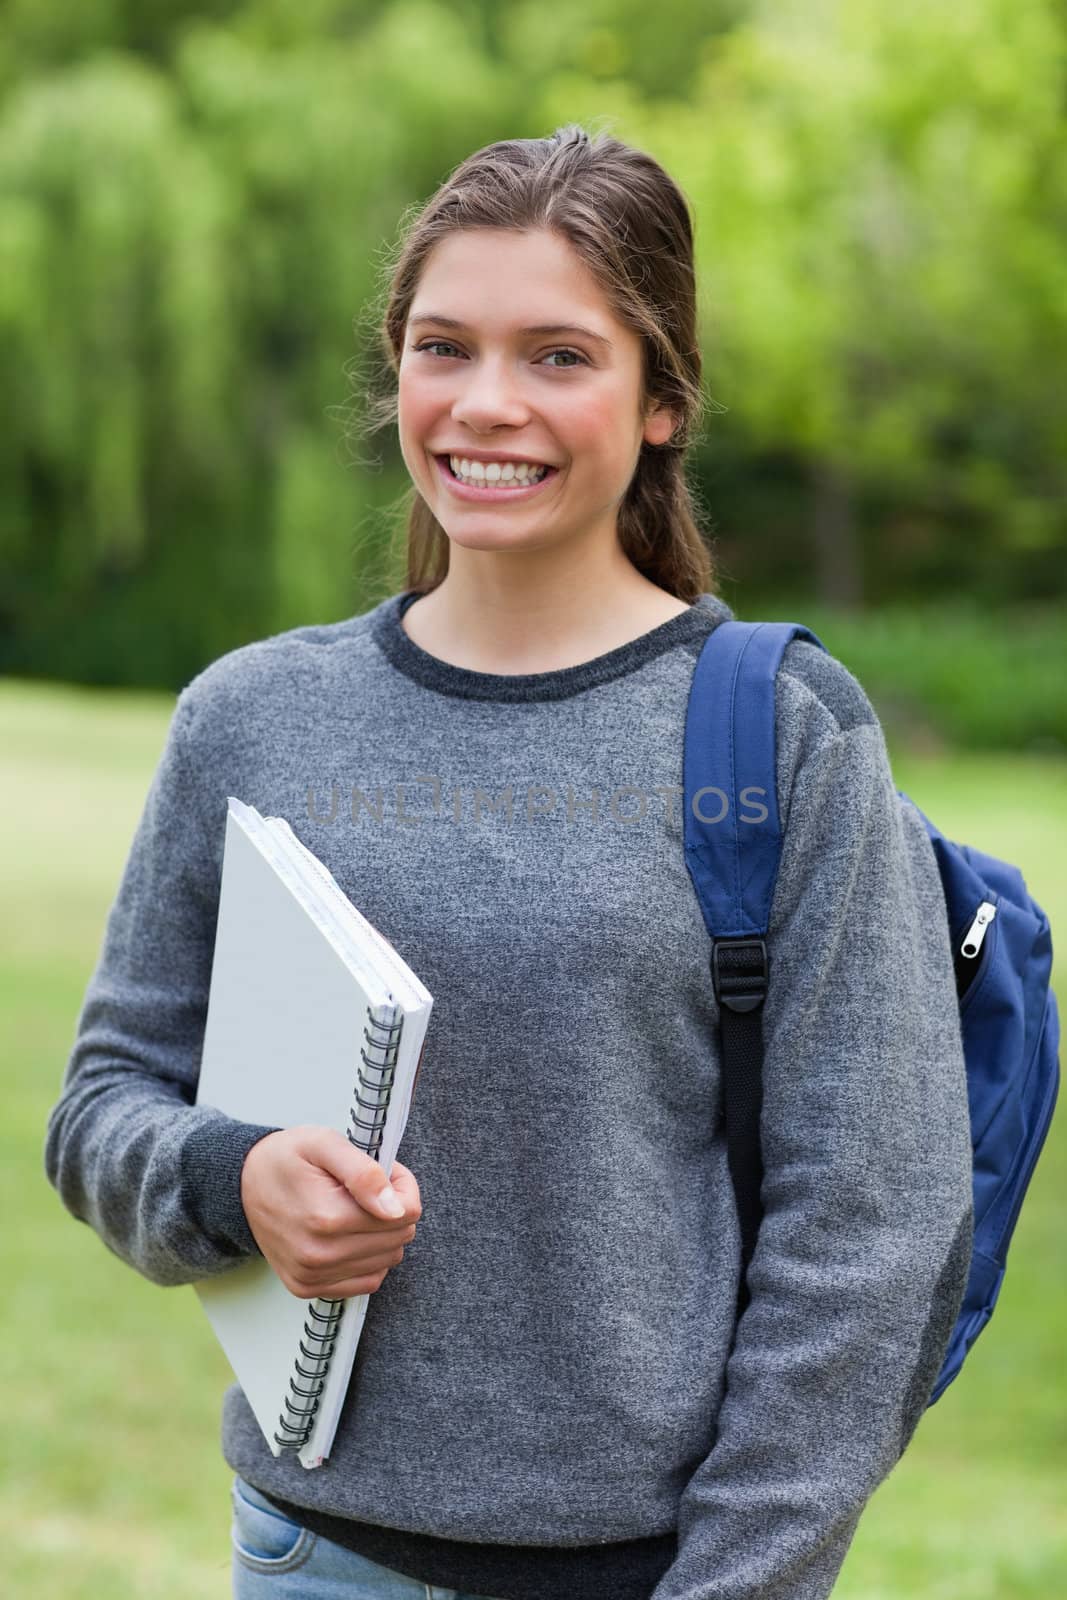 Teenager beaming while holding a notebook and standing upright in a park